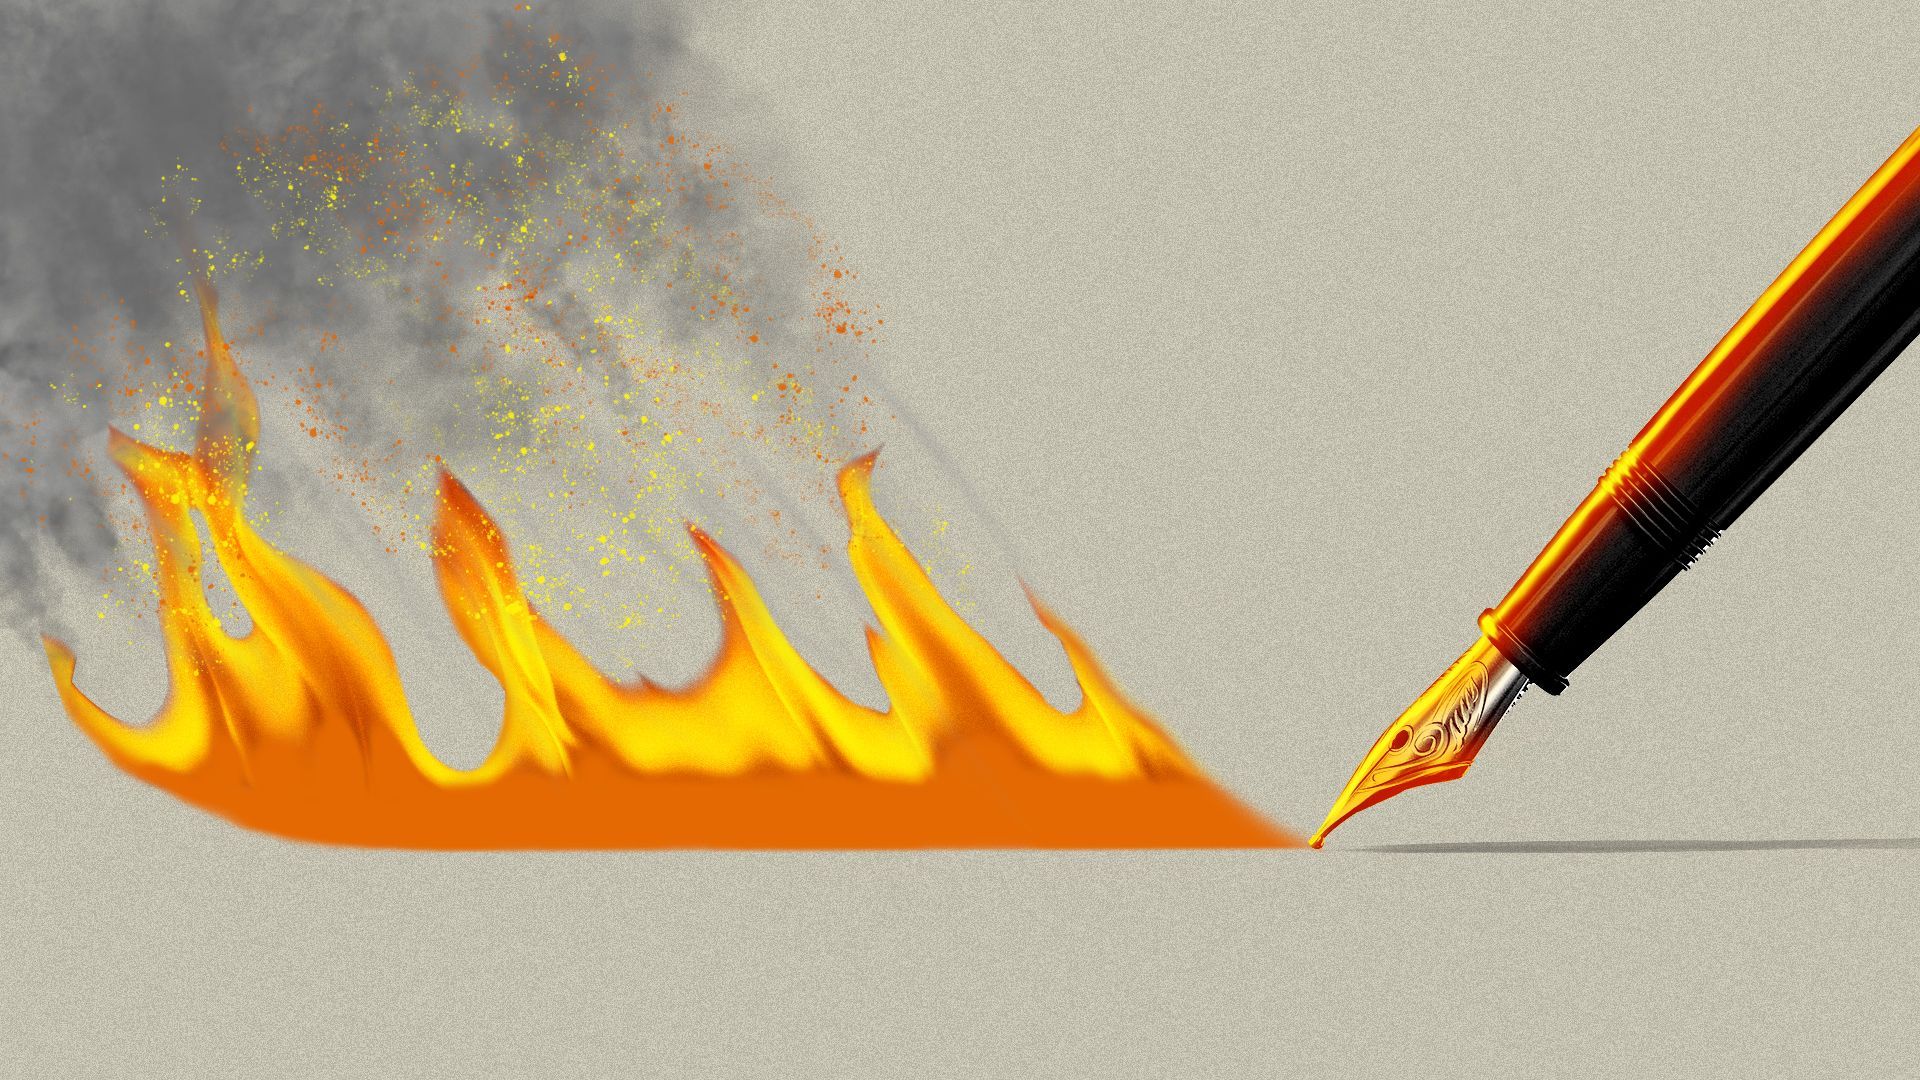 Illustration of a fountain pen with fire and smoke trailing behind it.